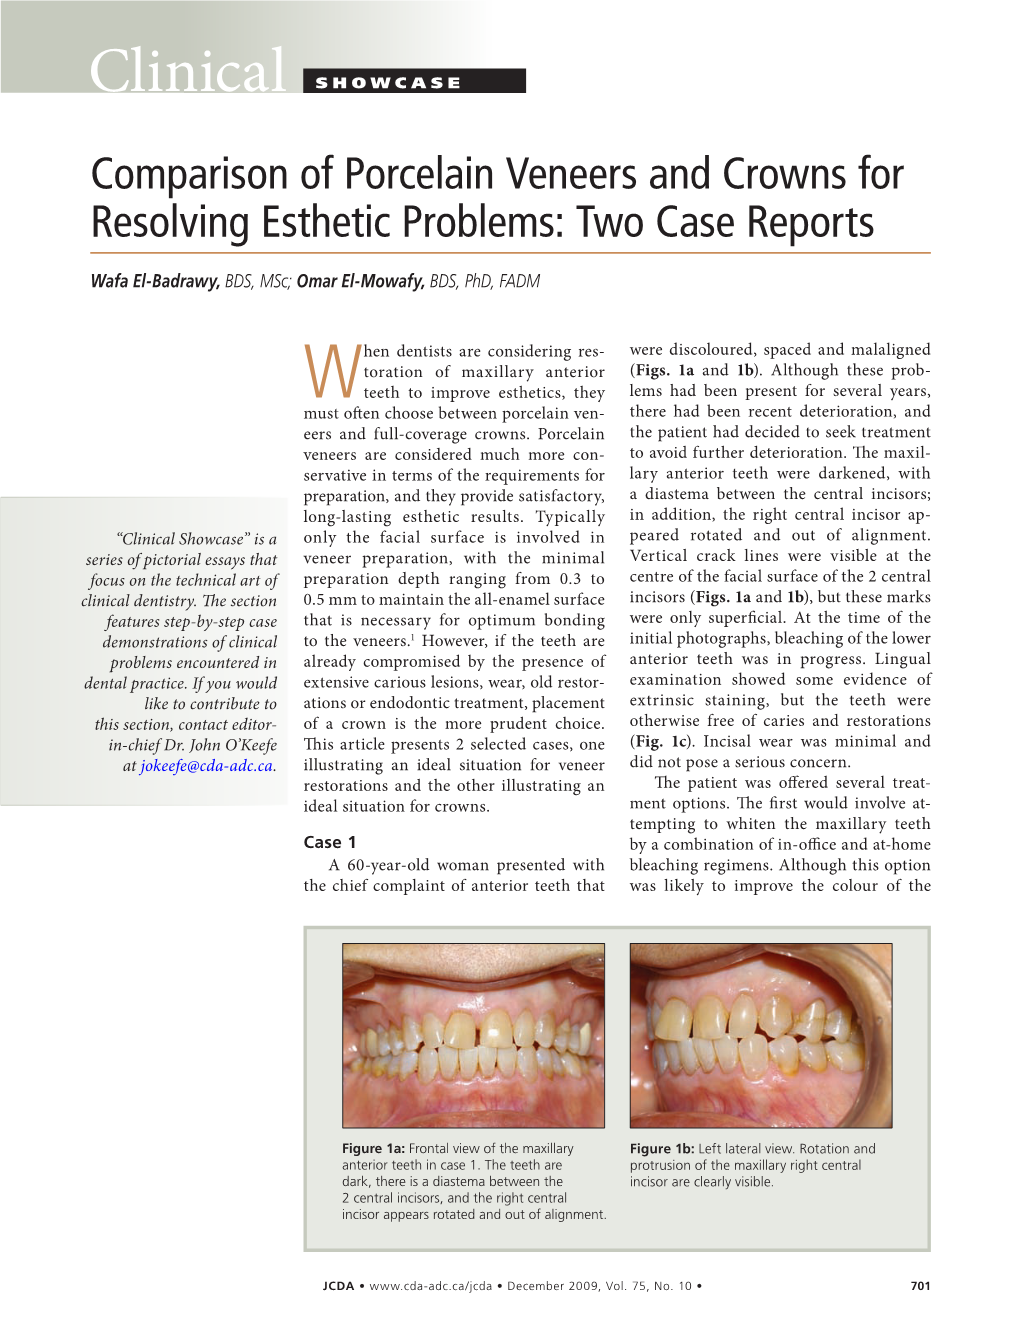 Comparison of Porcelain Veneers and Crowns for Resolving Esthetic Problems: Two Case Reports